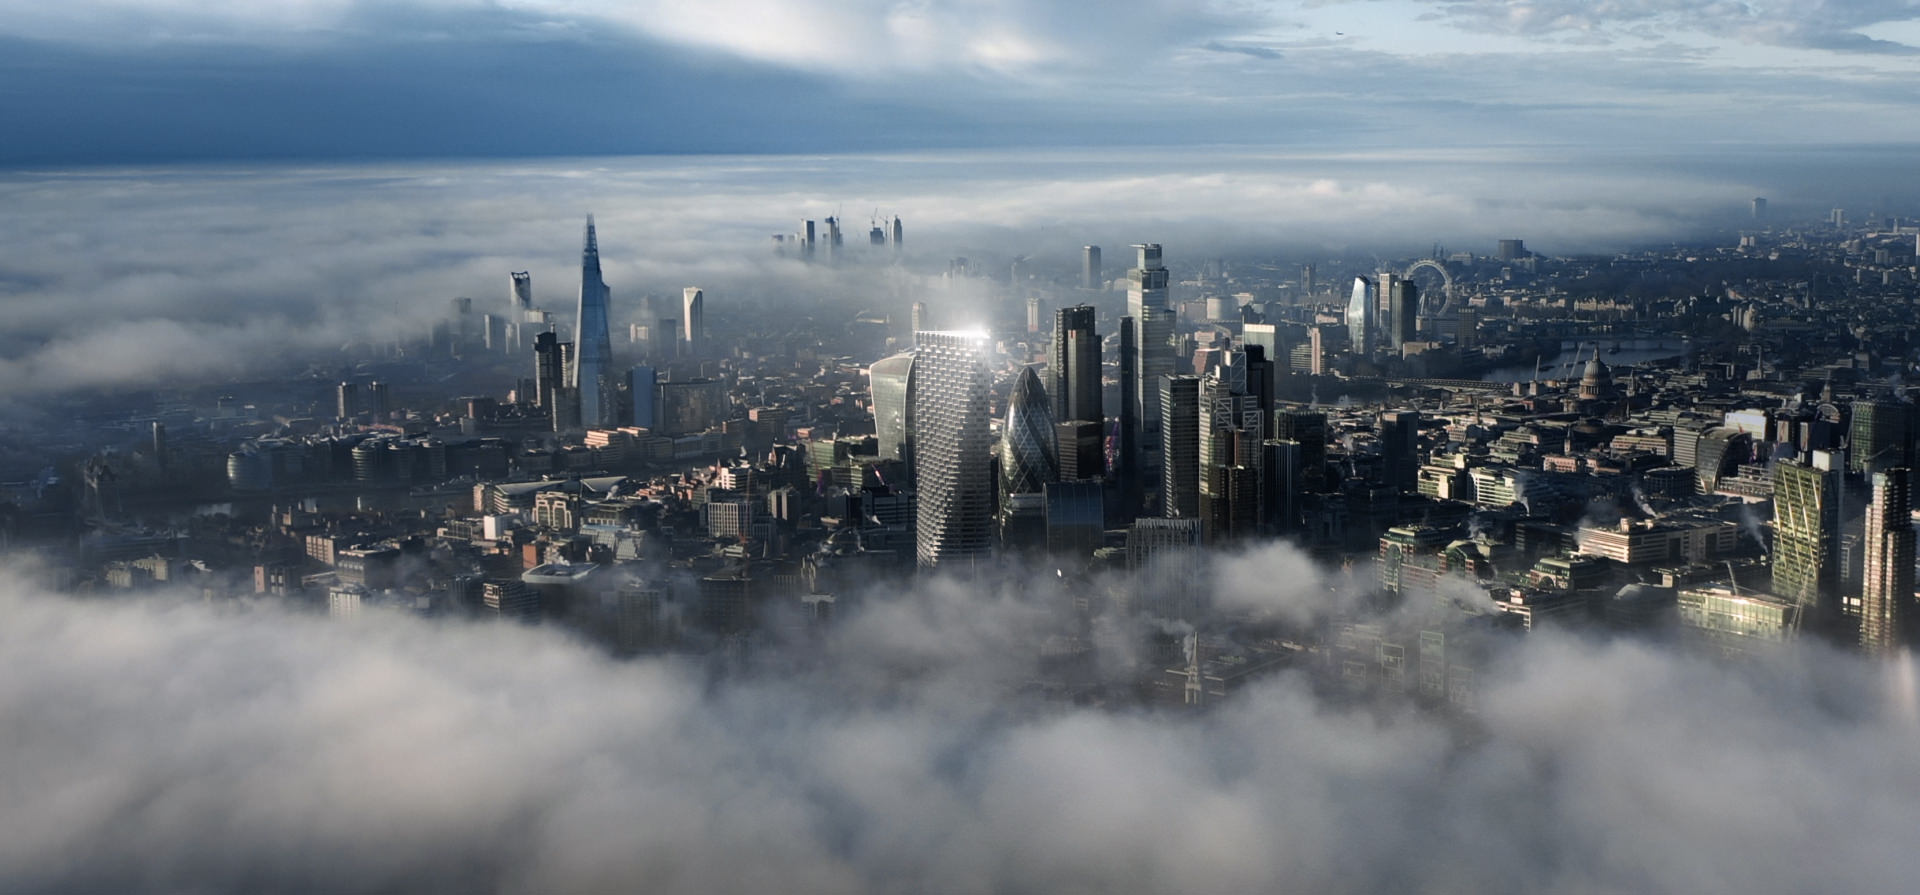 3D bird's-eye view of the urban landscape of London rendered among thick clouds to highlight skyscrapers